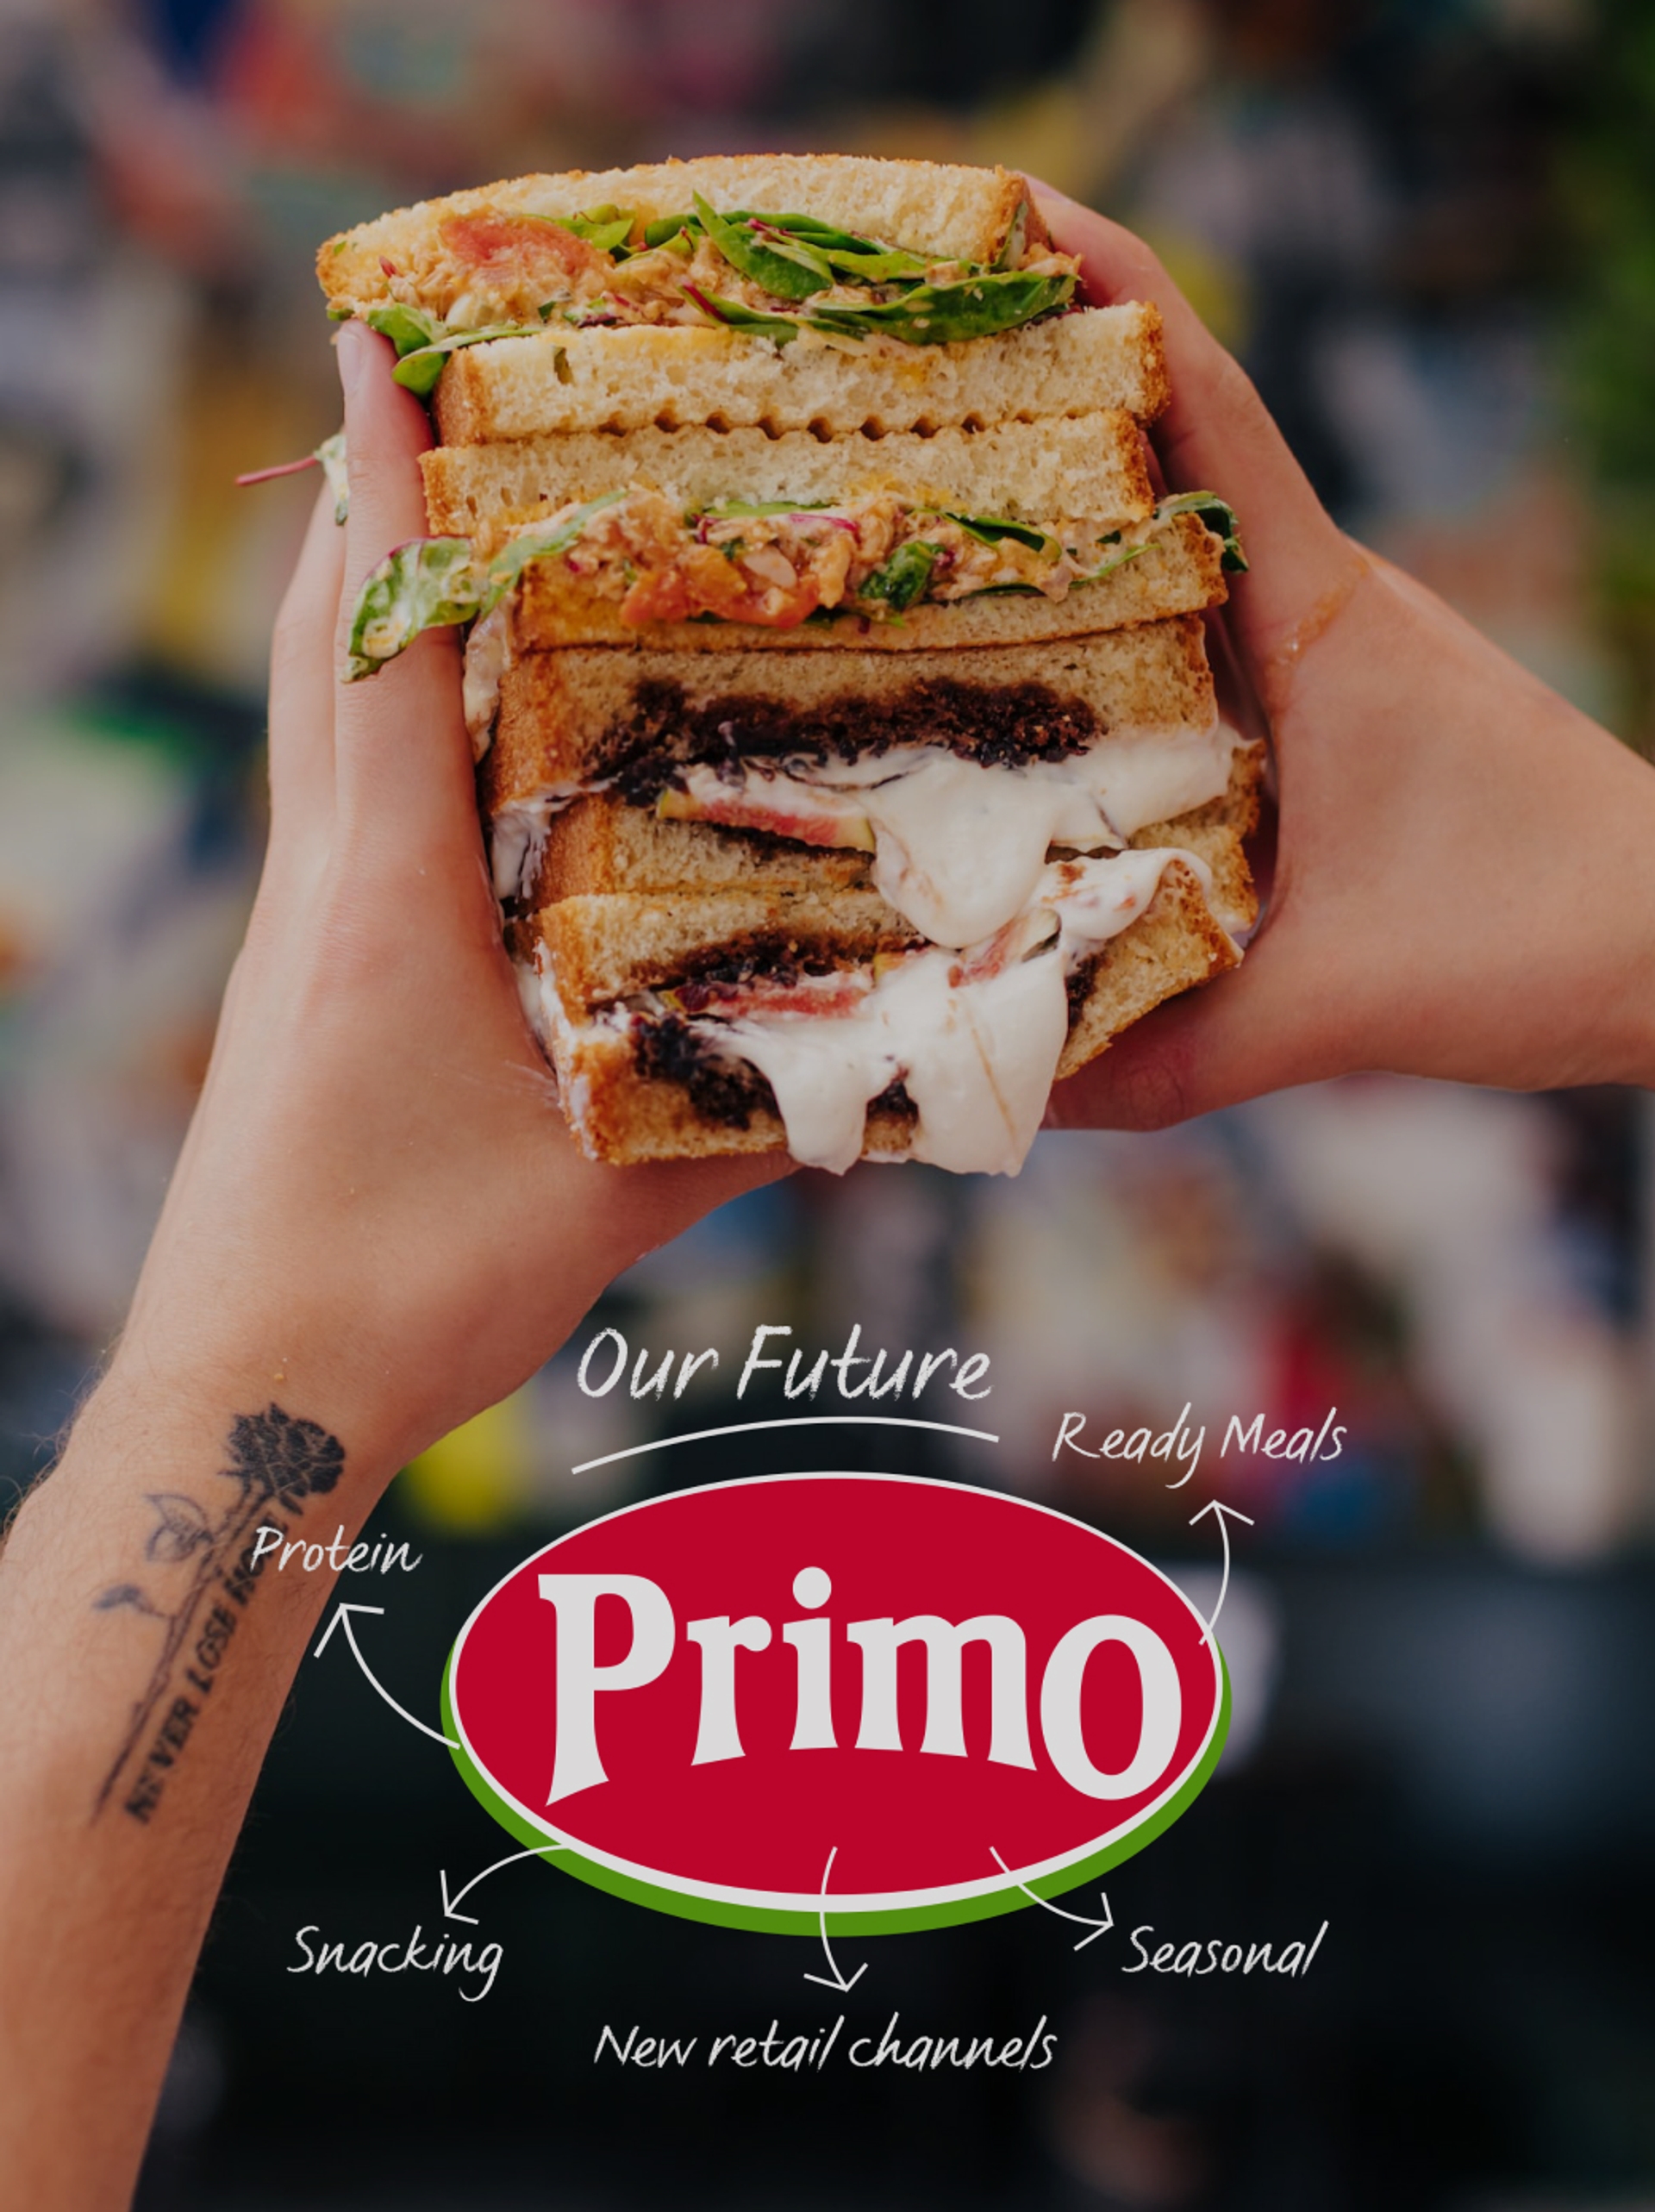 Hands holding four stacked sandwiches above Primo logo featuring hand-written text by Sydney brand design agency Our Revolution